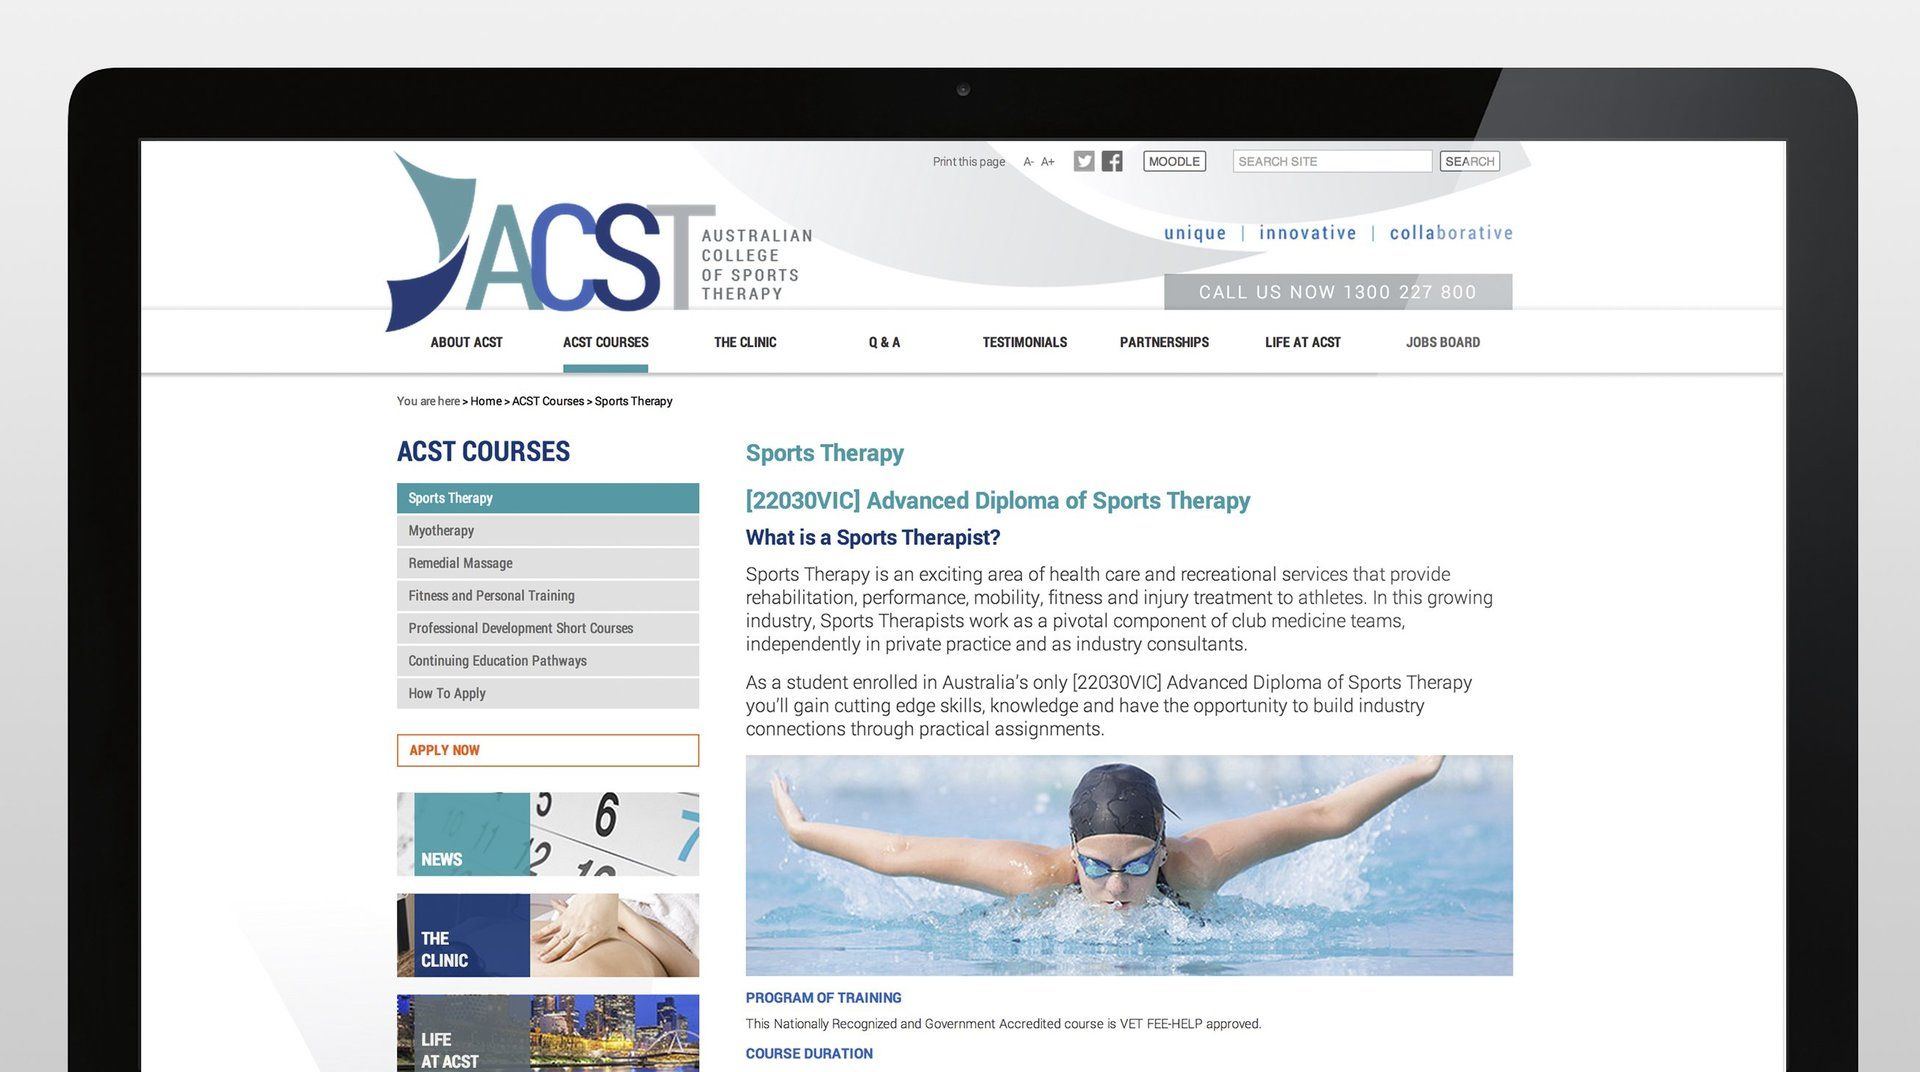 Australian College of Sports Therapy